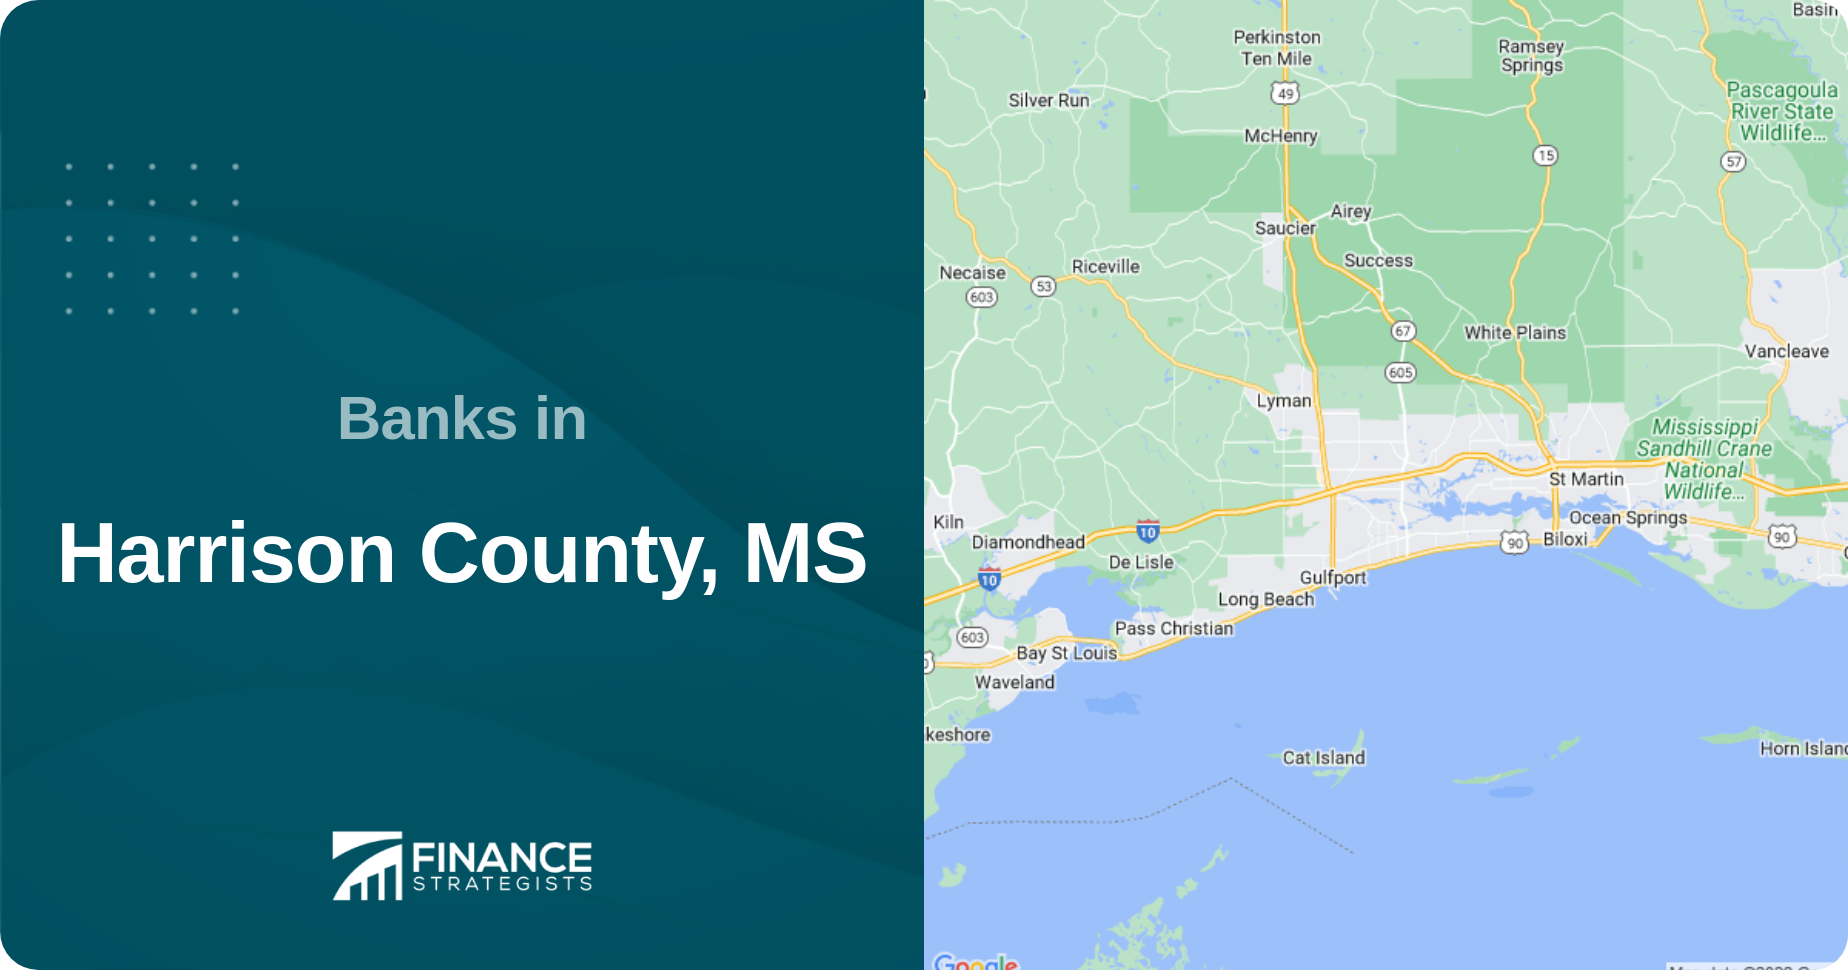 Banks in Harrison County, MS